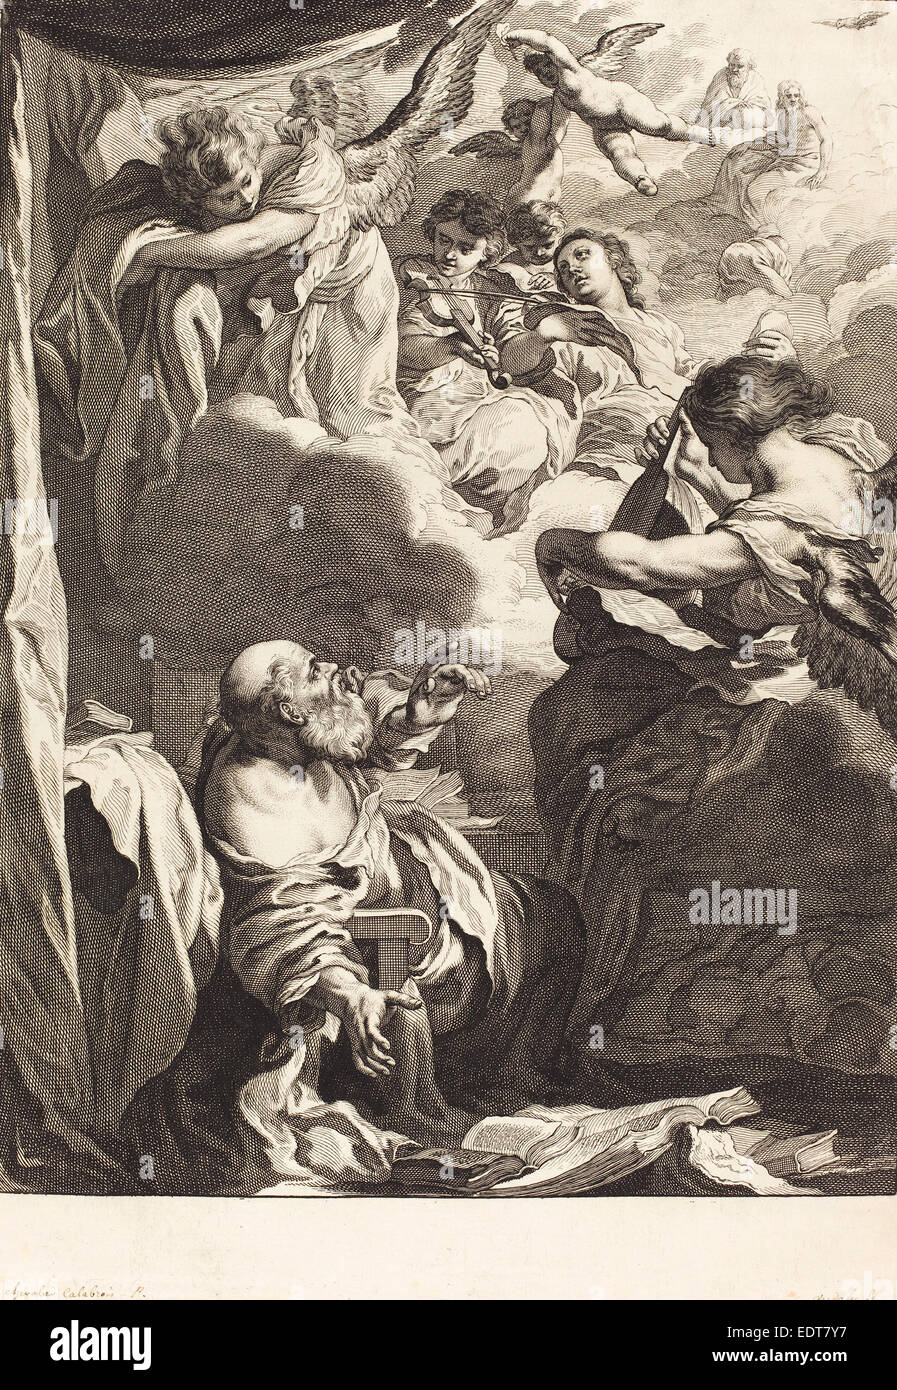 Jeremias Falck (German, c. 1619 - 1677), The Ecstasy of Saint Paul, c. 1655, engraving and etching on laid paper Stock Photo